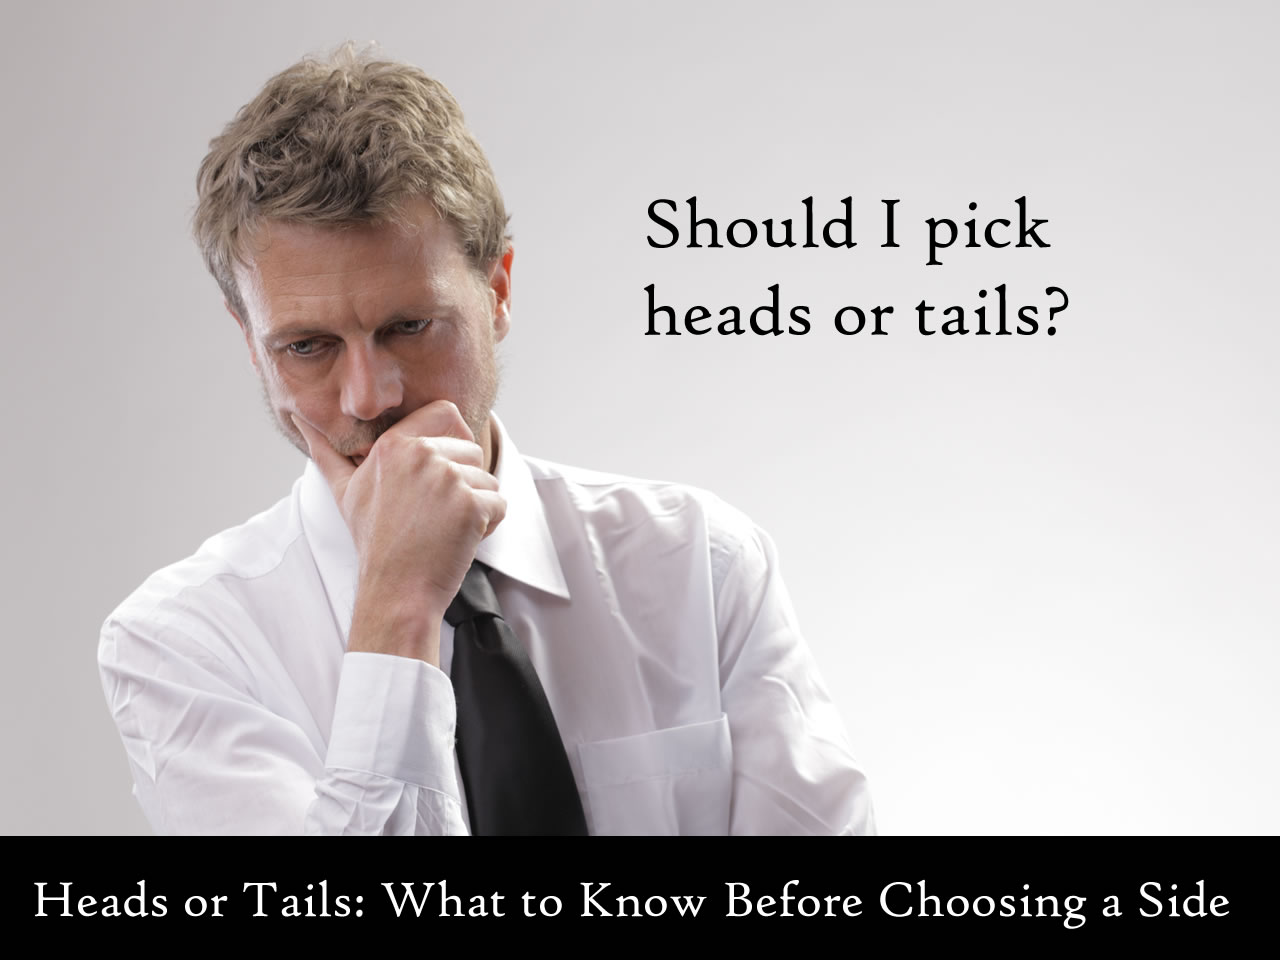 Heads or Tails: What to Know Before Choosing a Side